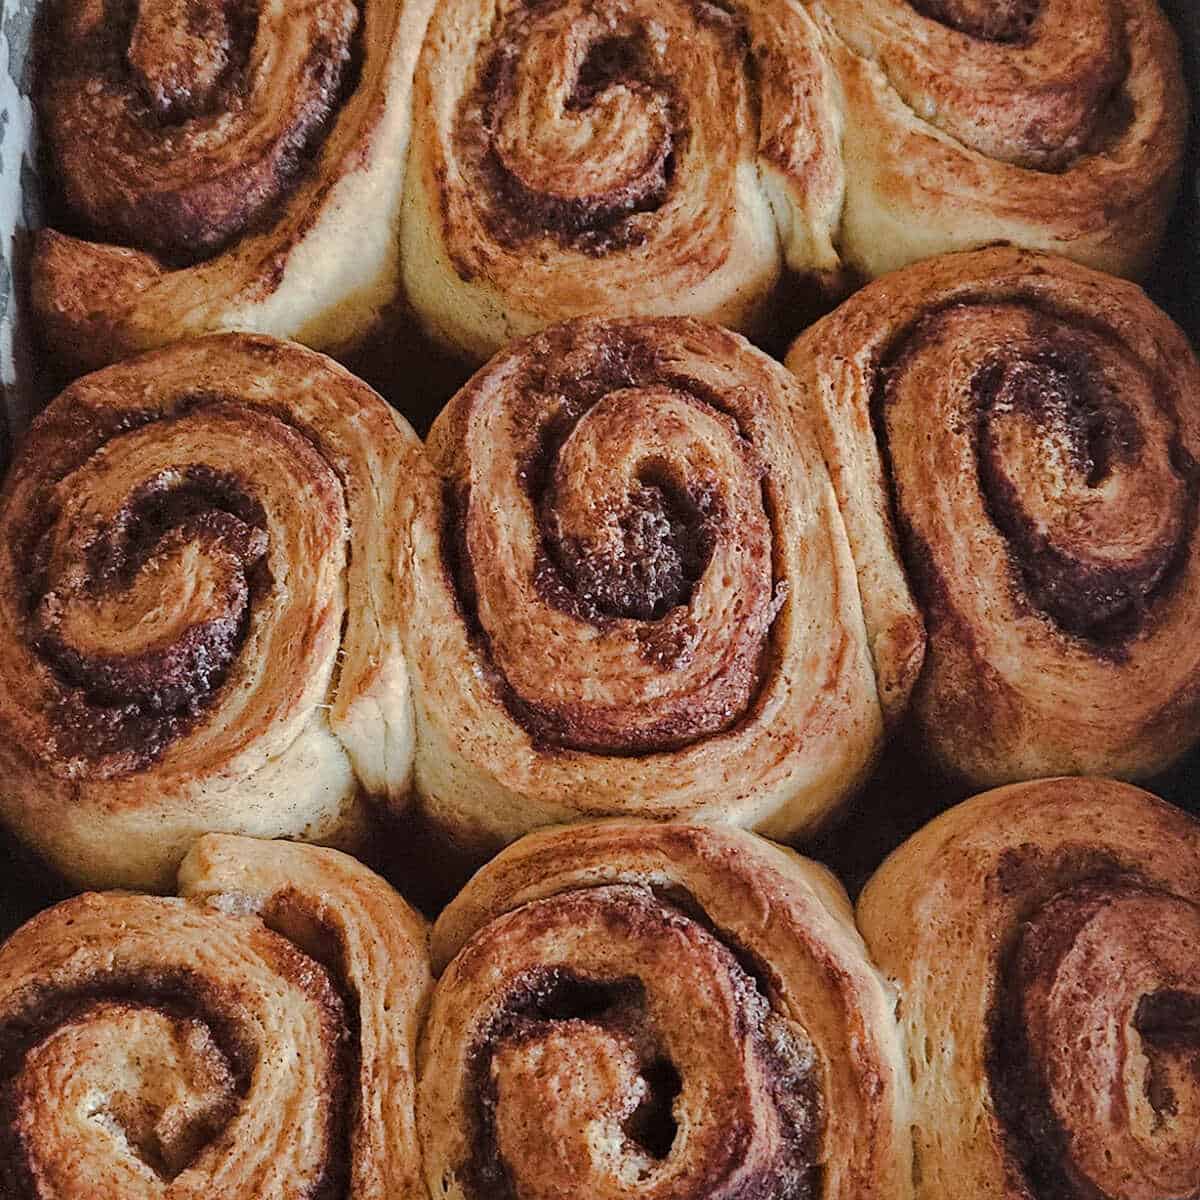 several cinnamon rolls finished baking, waiting to be iced.